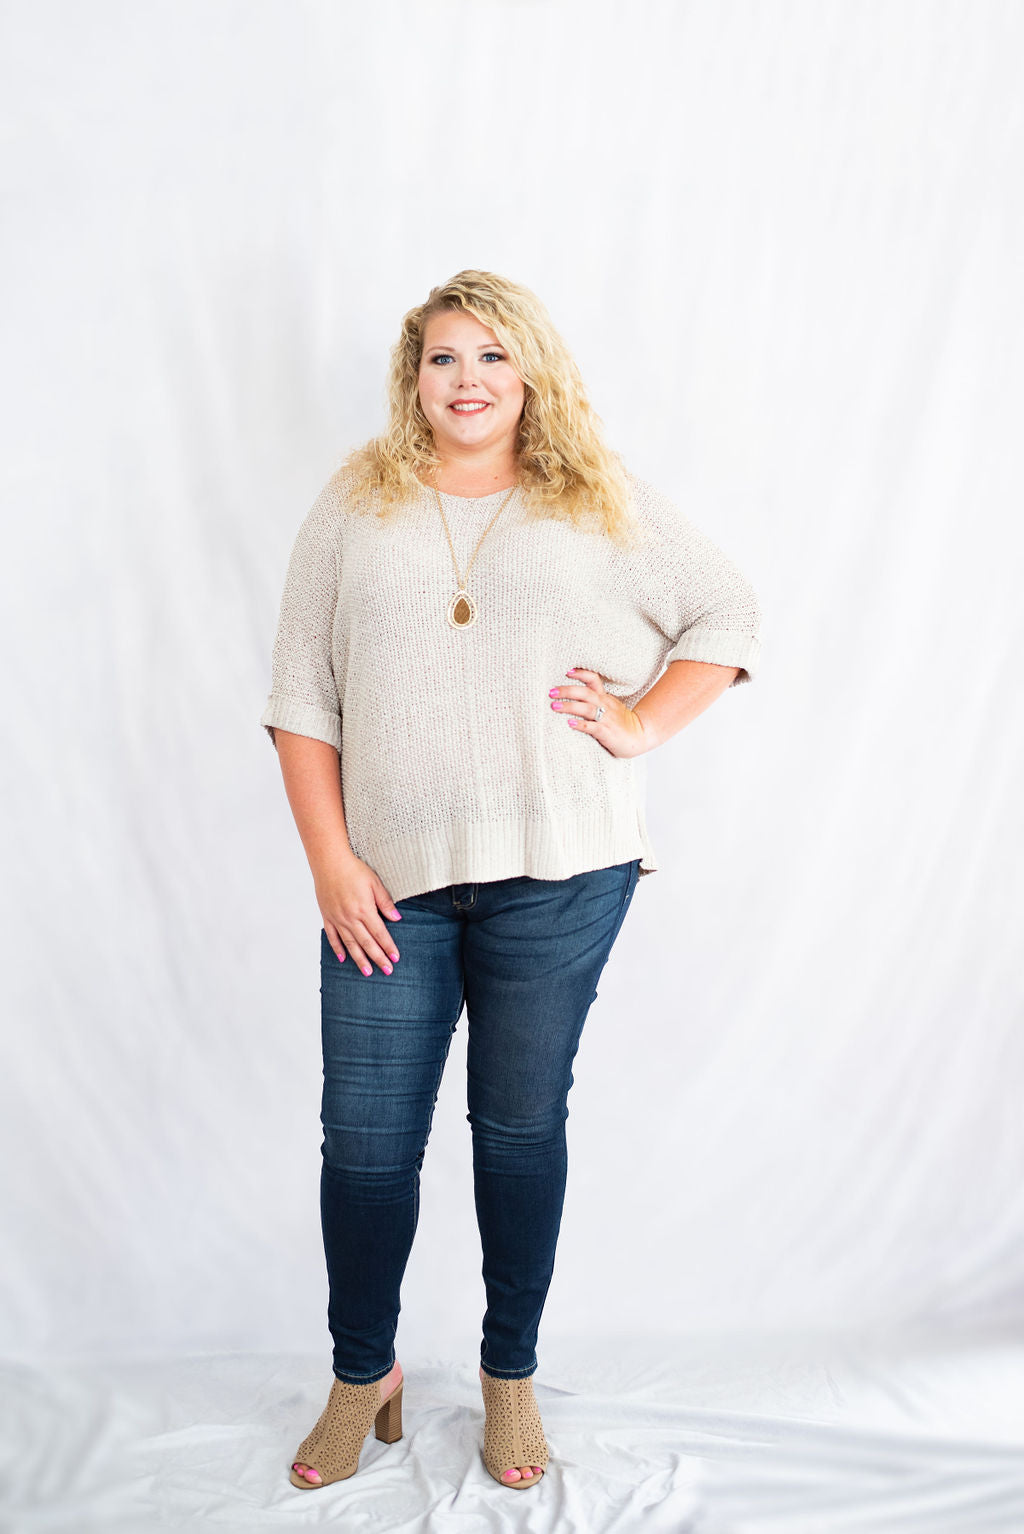 It's A Breeze Tunic Sweater Knit Top in Plus Size by Easel Clothing